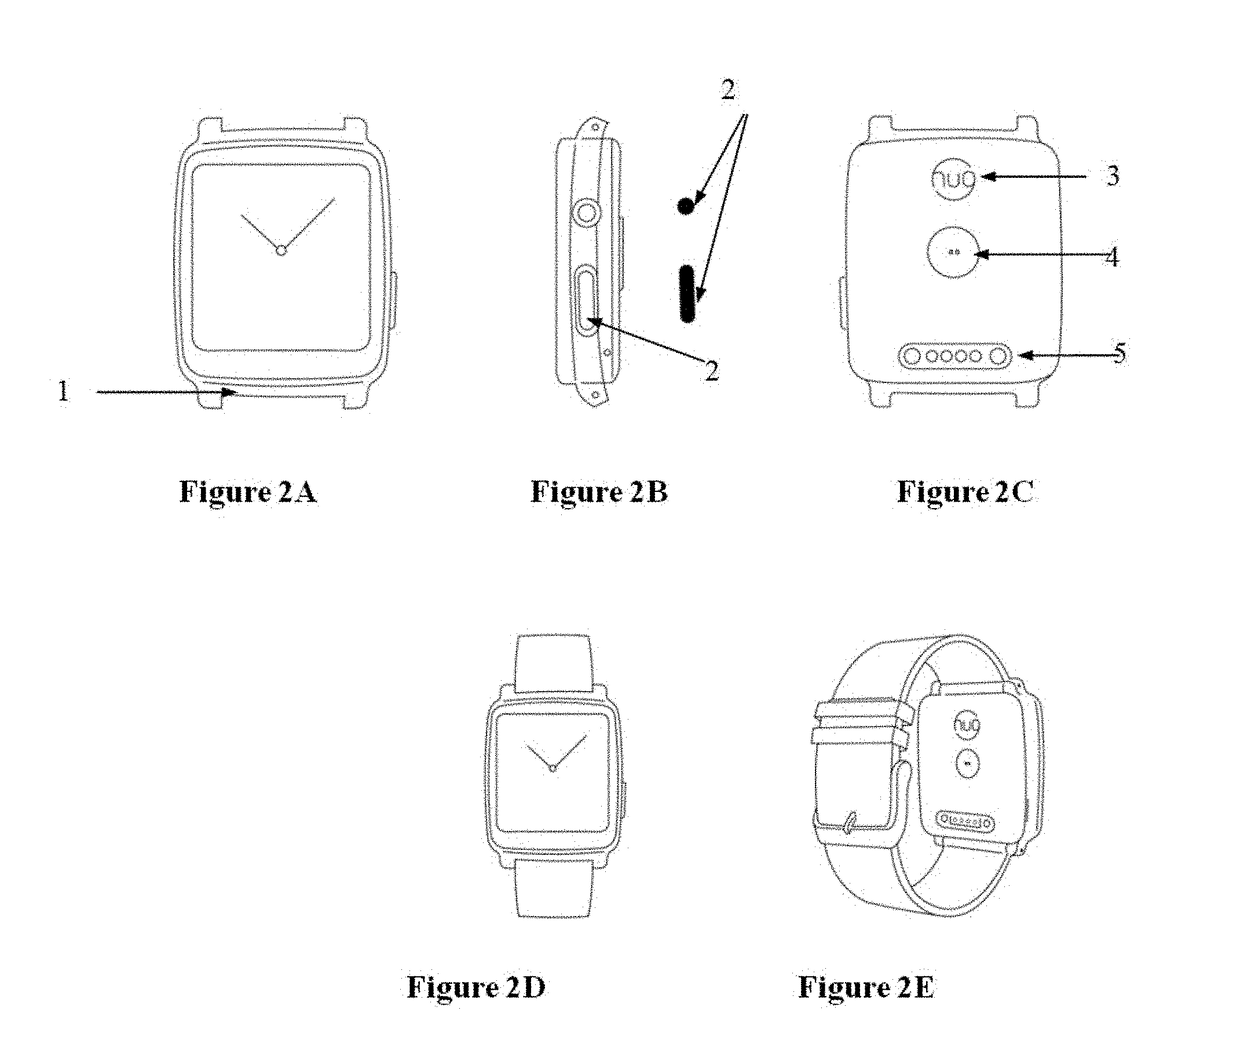 Wearable device for safety monitoring of a user